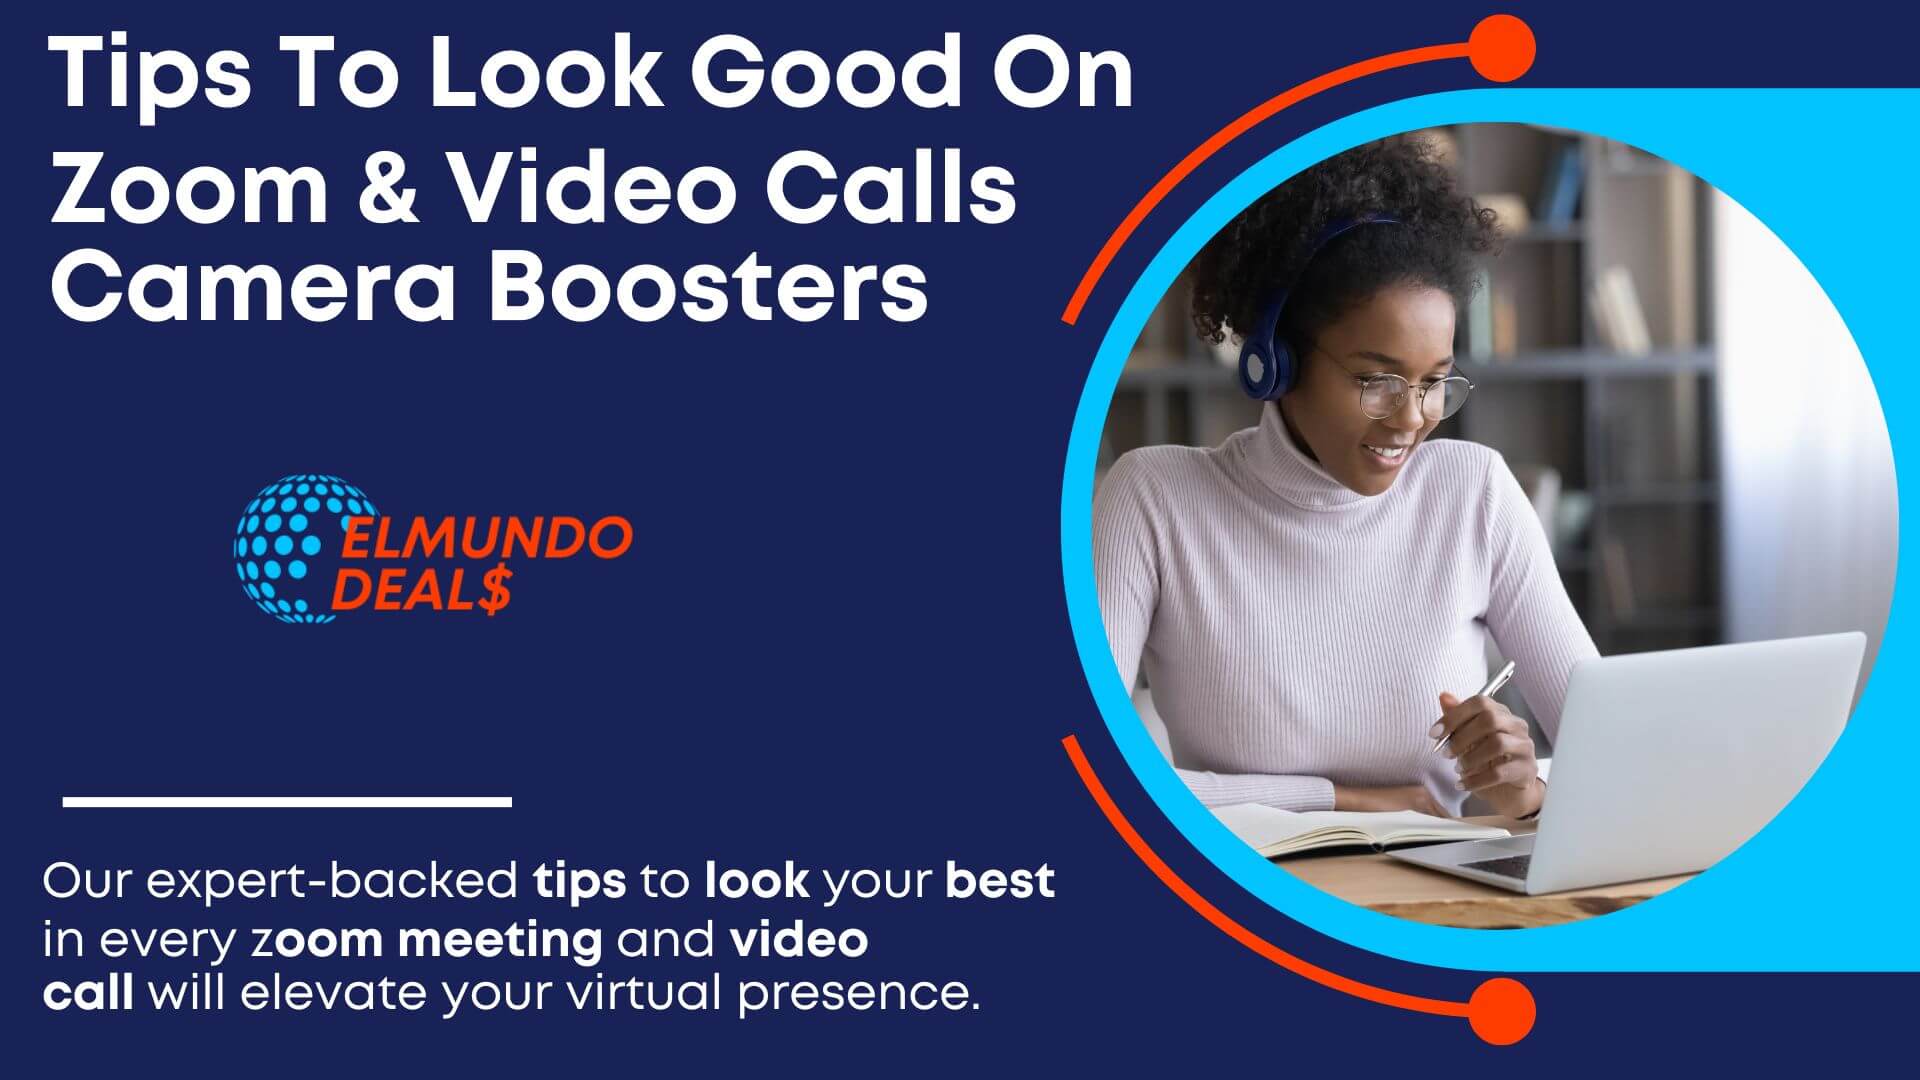 15 Amazing Tips To Look Good On Zoom & Video Calls: Camera Booster